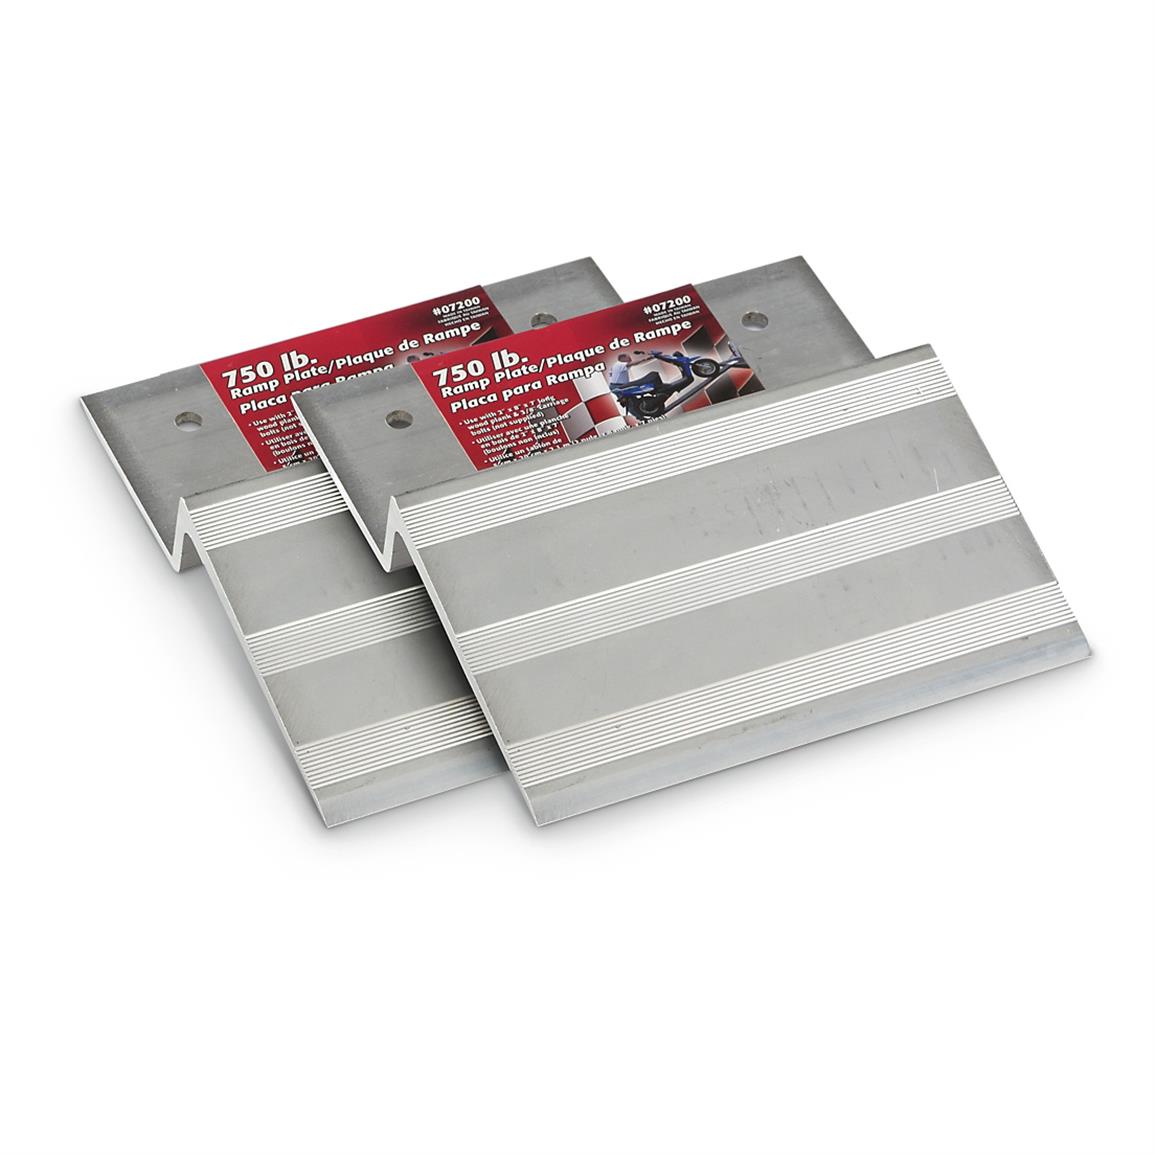 2 Erickson 1/4" 750lb. Aluminum Ramp Plate Ends 613101, Ramps & Tie Downs at Sportsman's Guide